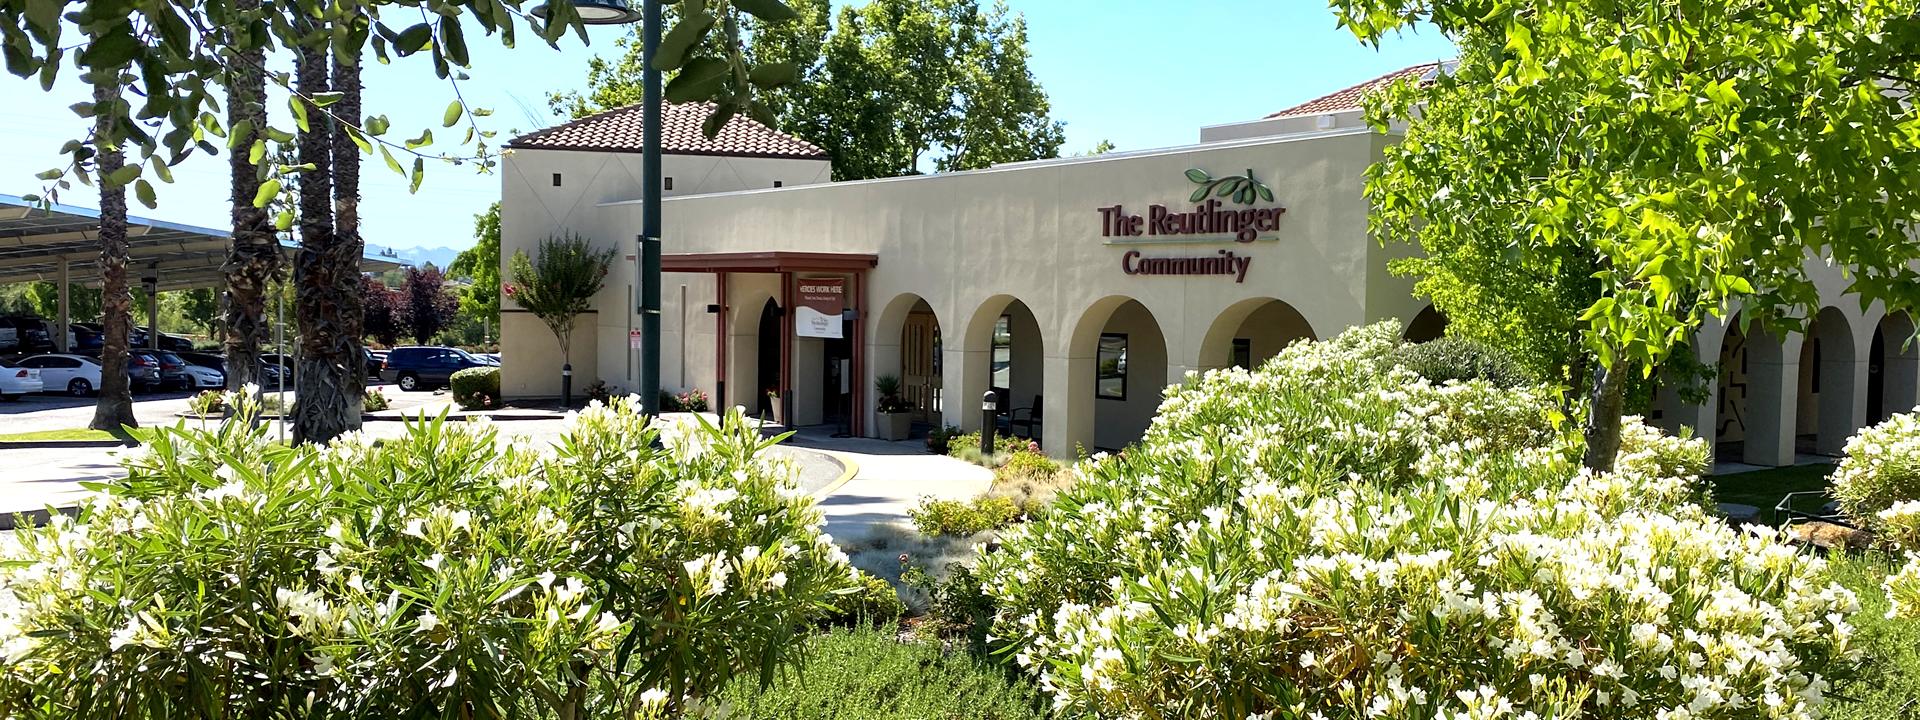 Located in Danville, CA, The Reutlinger is a premiere senior living community offering varying levels of living options - front exterior